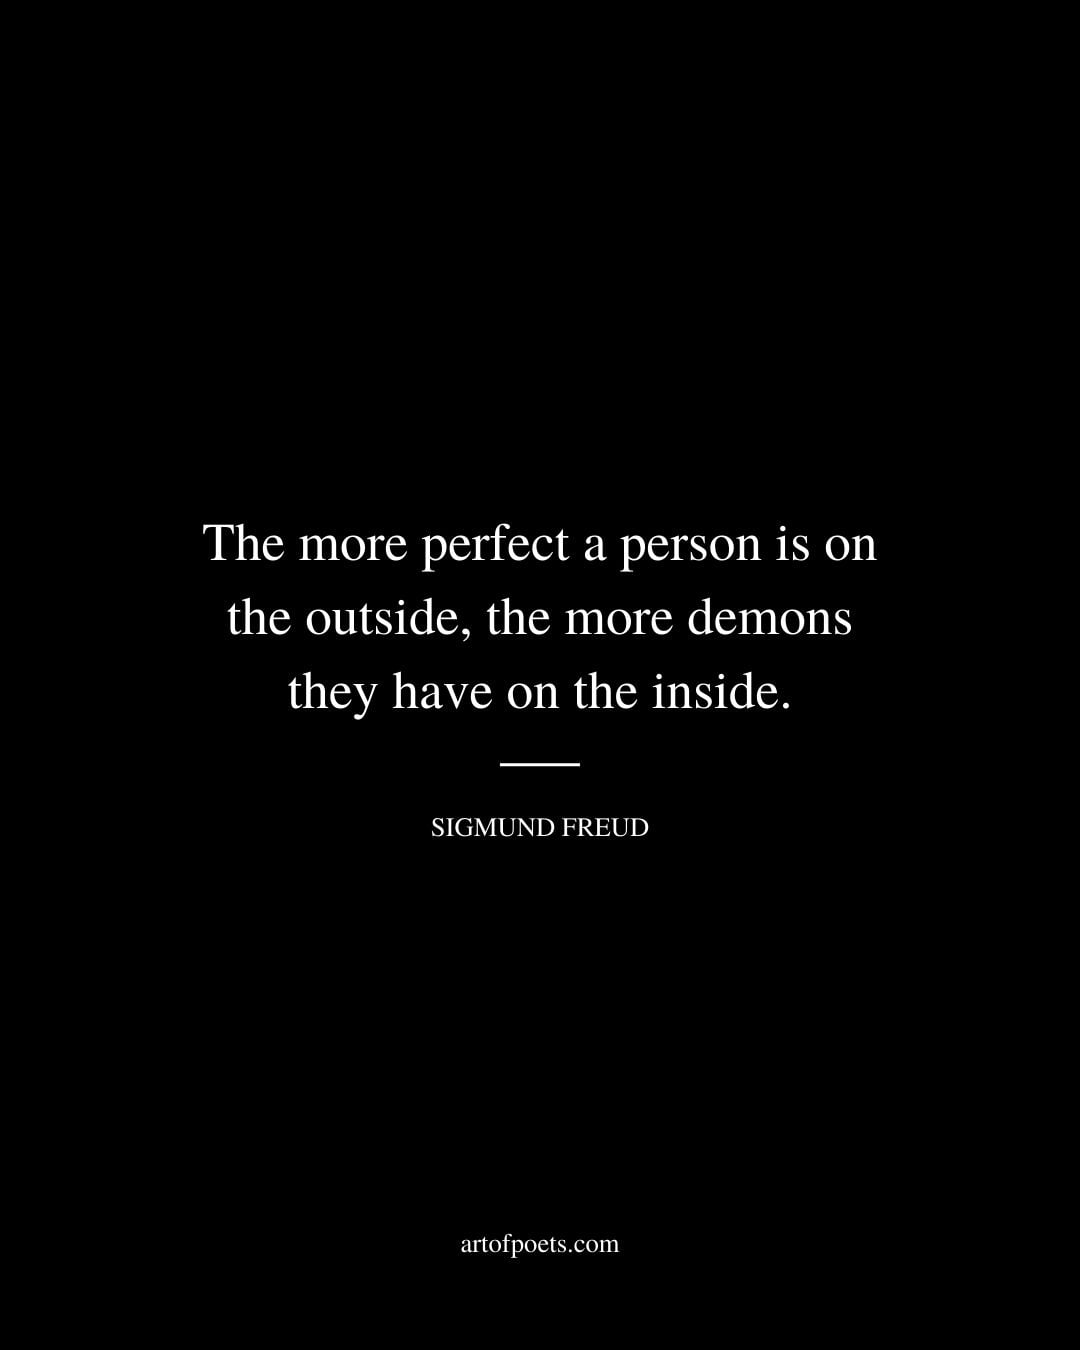 The more perfect a person is on the outside the more demons they have on the inside